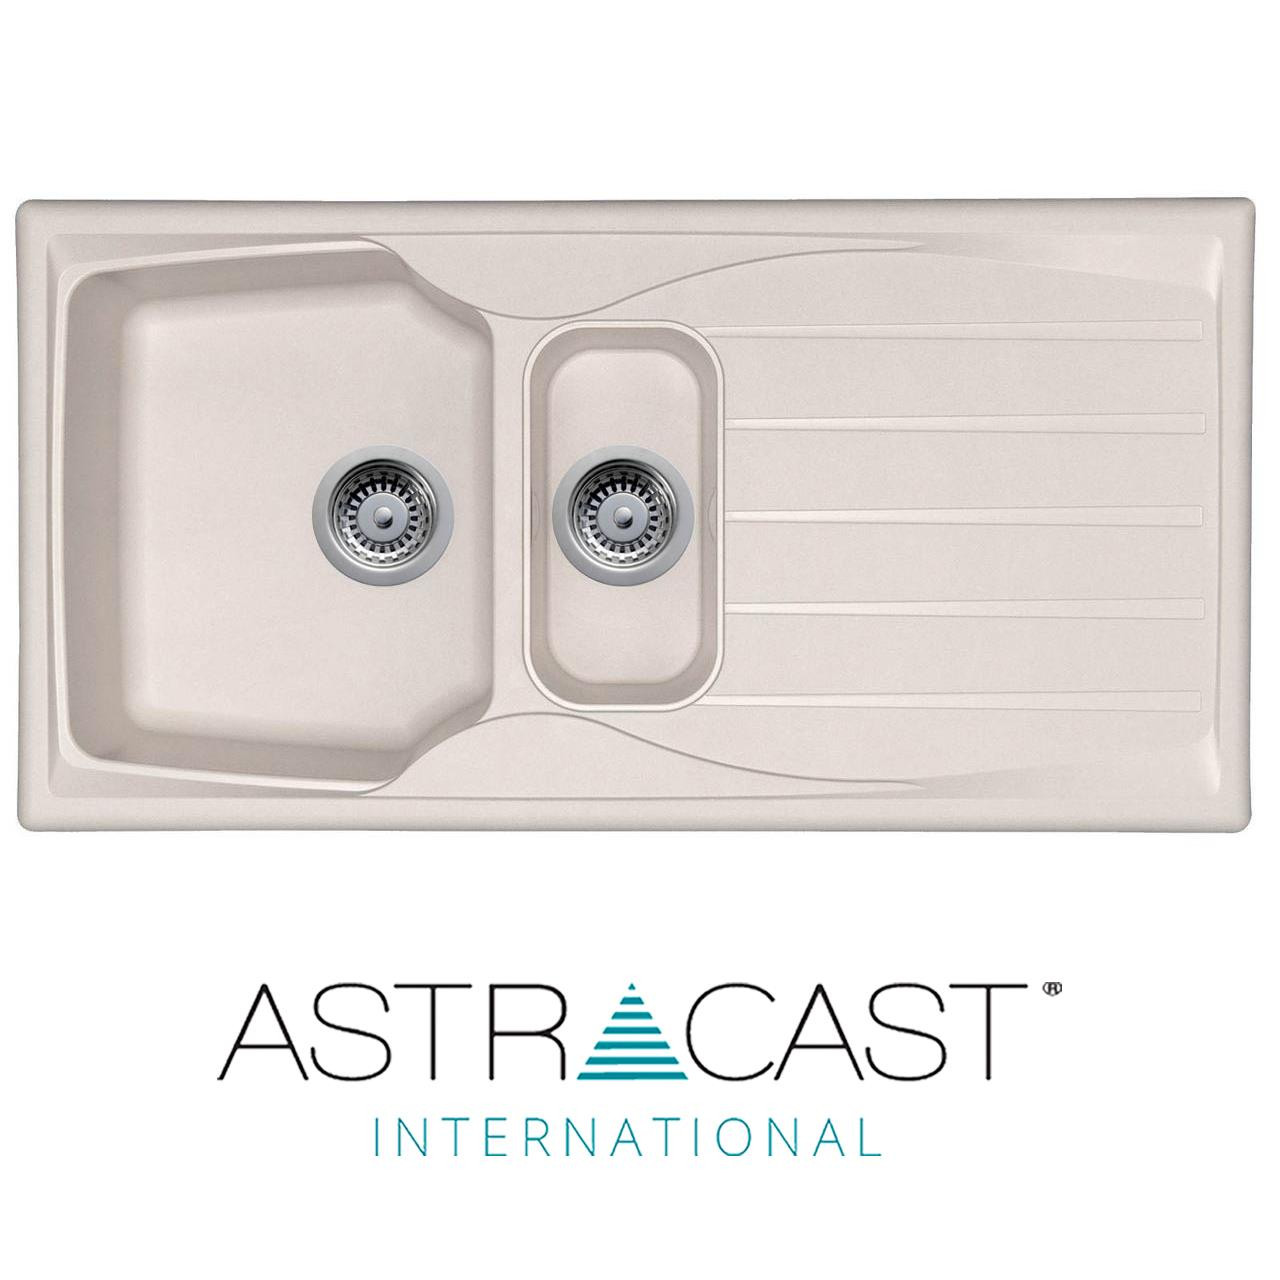 Astracast Sierra 1.5 Bowl Light Grey Composite Kitchen Sink and Chrome Mixer Tap